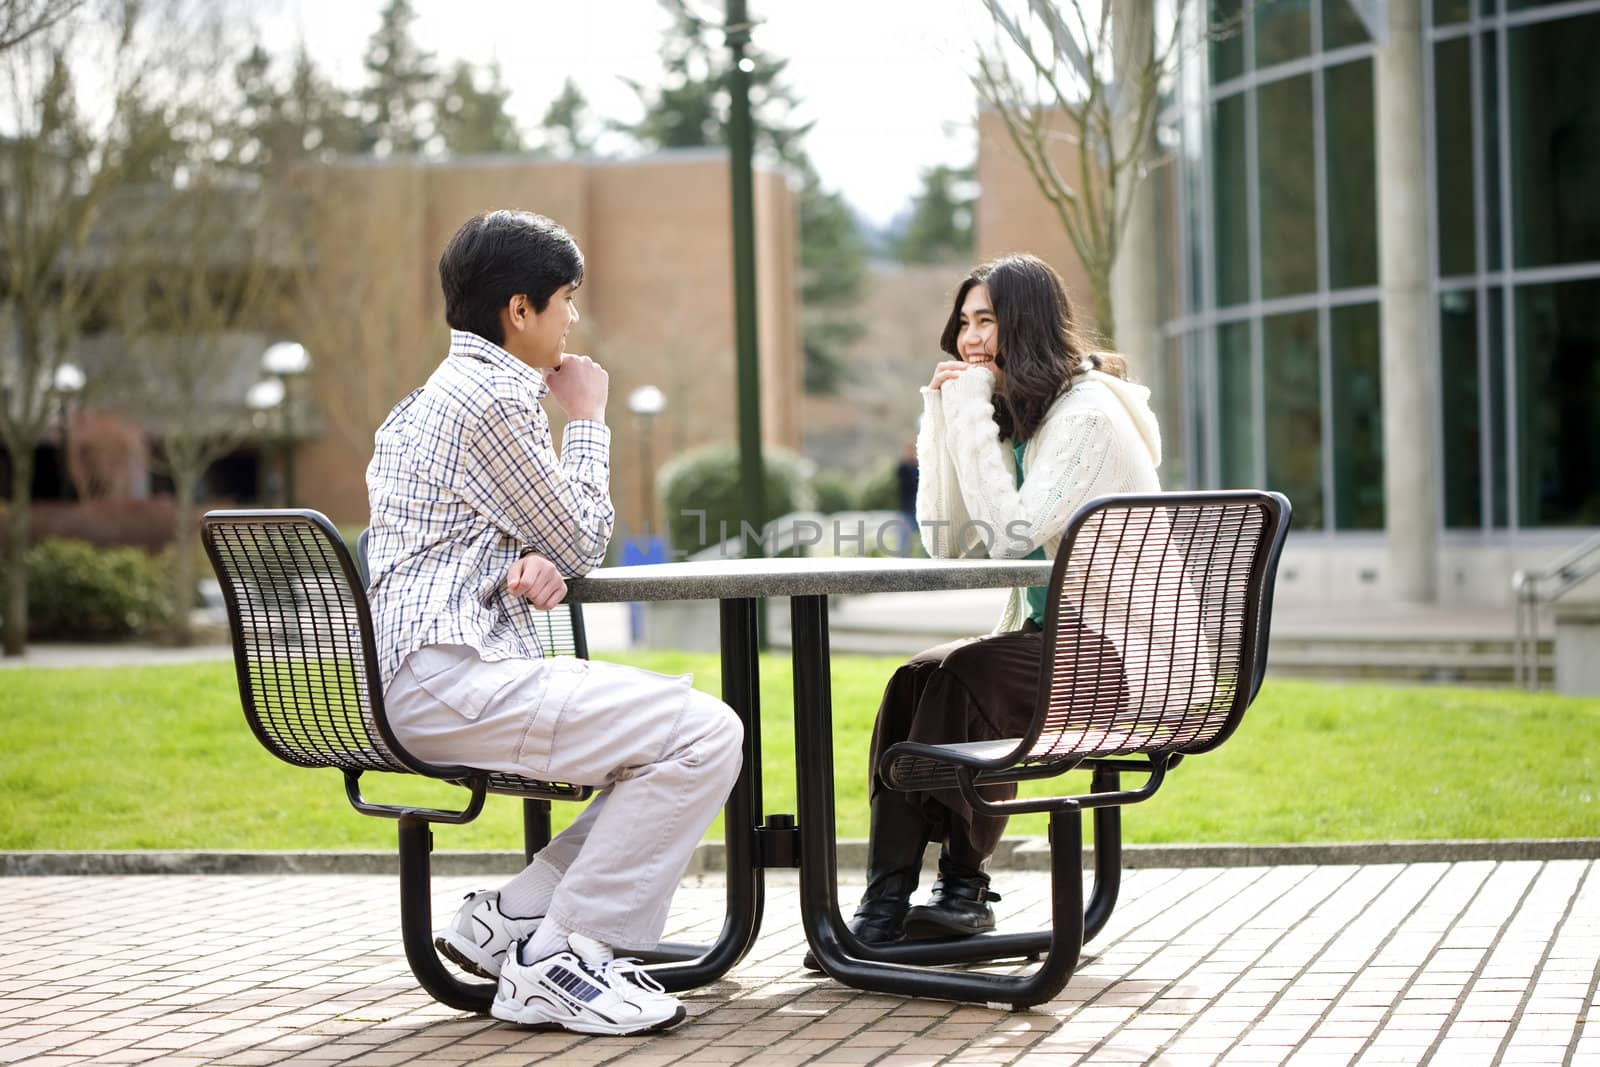 Two young teenagers sitting talking together outdoors